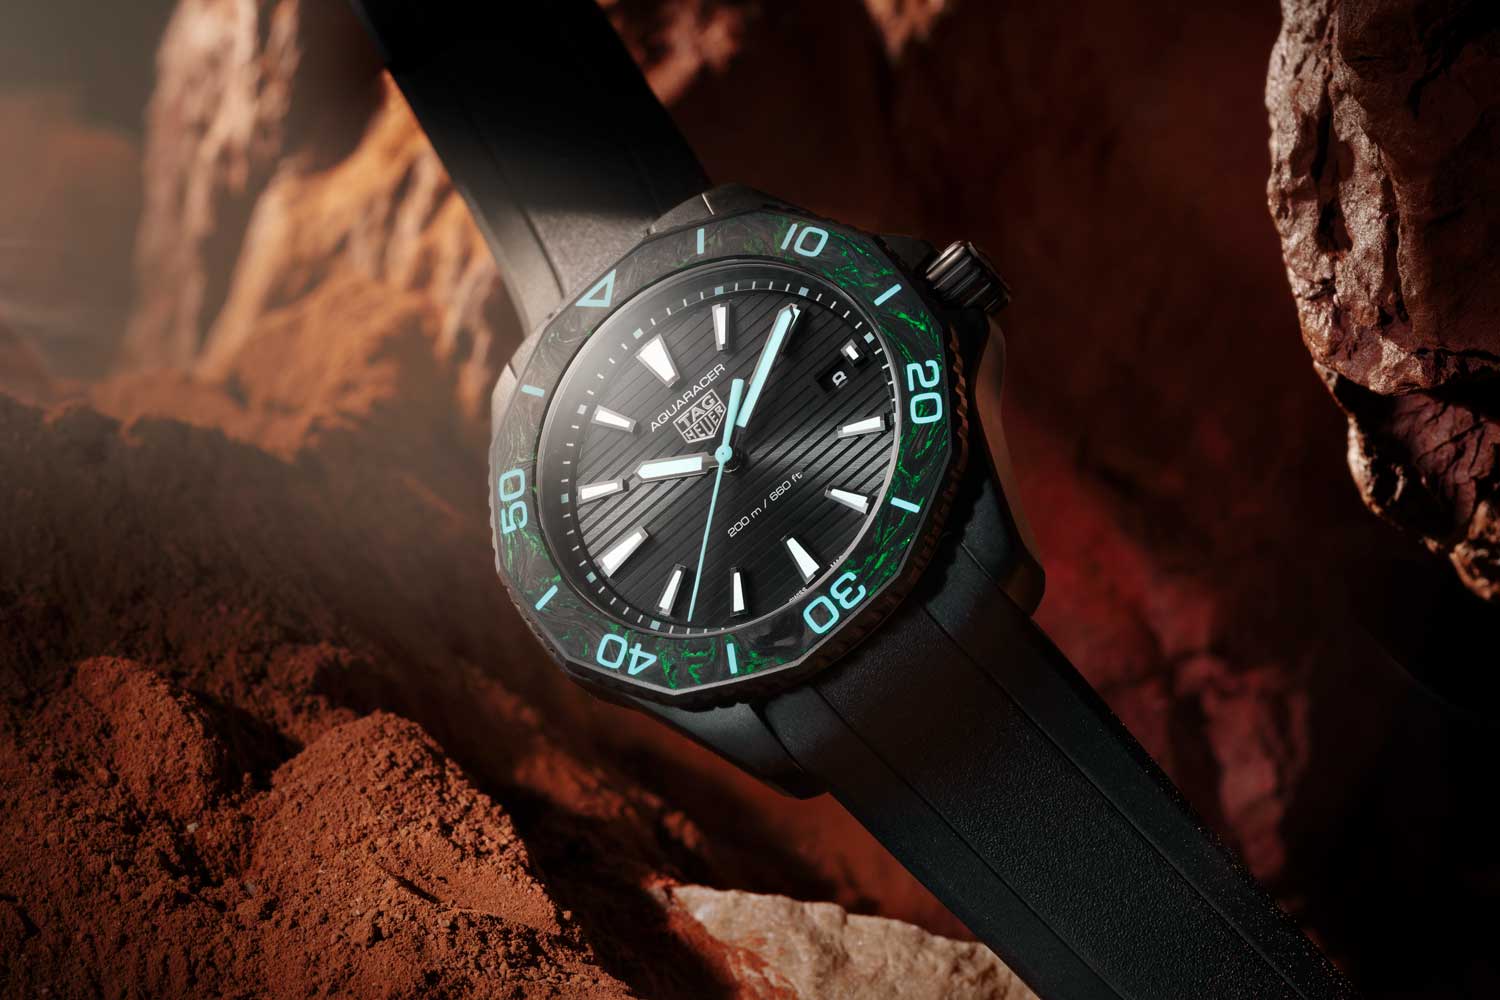 Good looks and smart technology mean that the TAG Heuer Aquaracer Professional 200 Solargraph is perfect for actual adventure